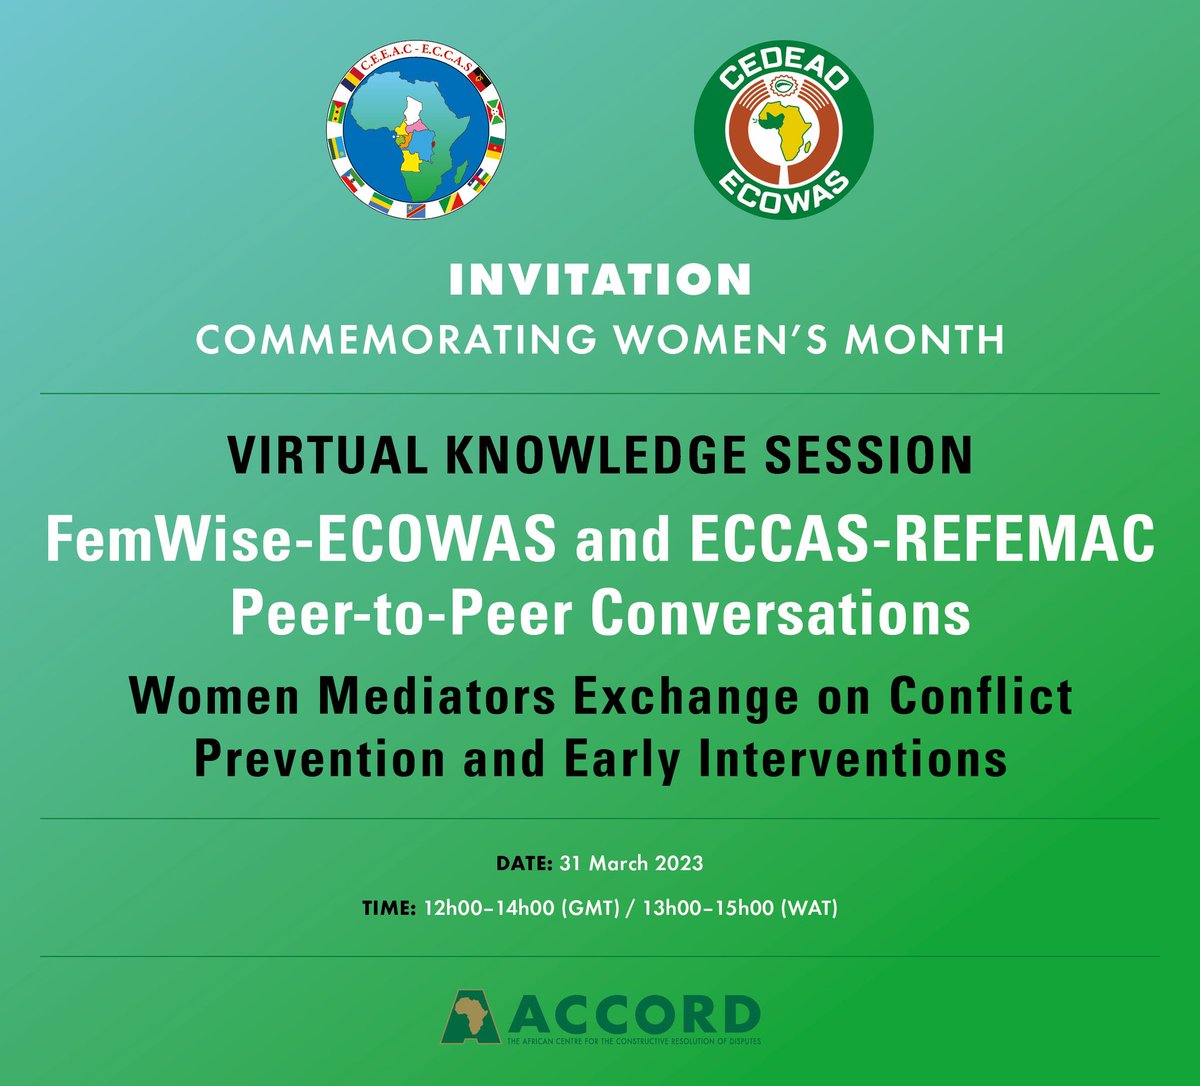 #FemWise Join us tomorrow on this Peer-to-Peer Conversations: Women Mediators Exchange on Conflict Prevention where the Co - chairs will be sharing the efforts undertaken by FemWise-WA in the implementation of women in peace processes. #WomenMediators #WPSAgenda #Ecowas #Eccas